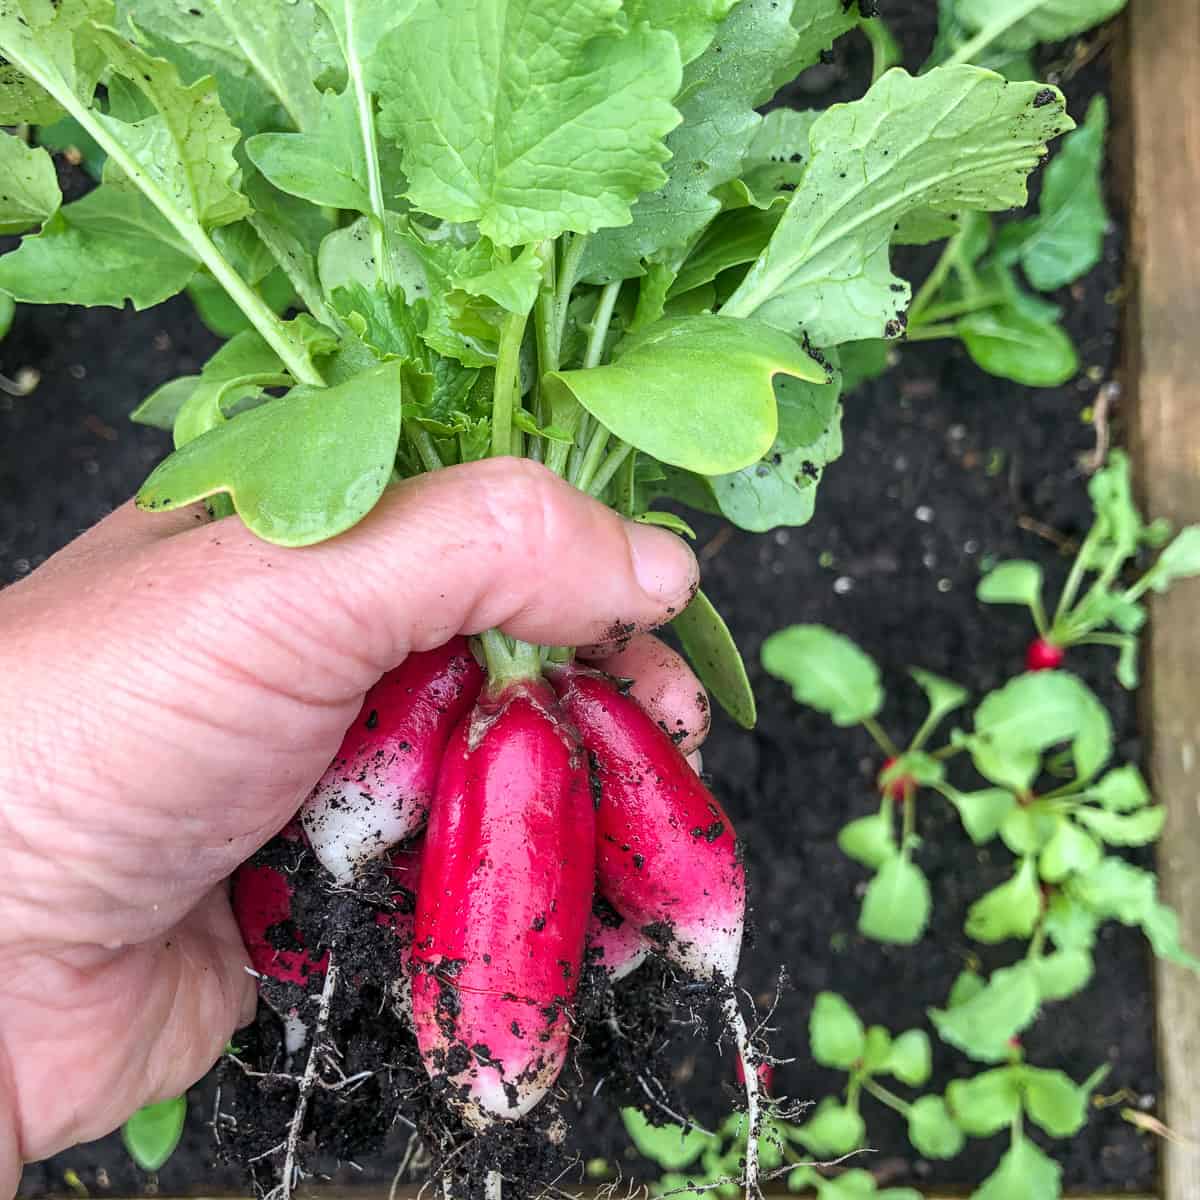 A woman's hand holding a handful of radishes that she has just harvested.